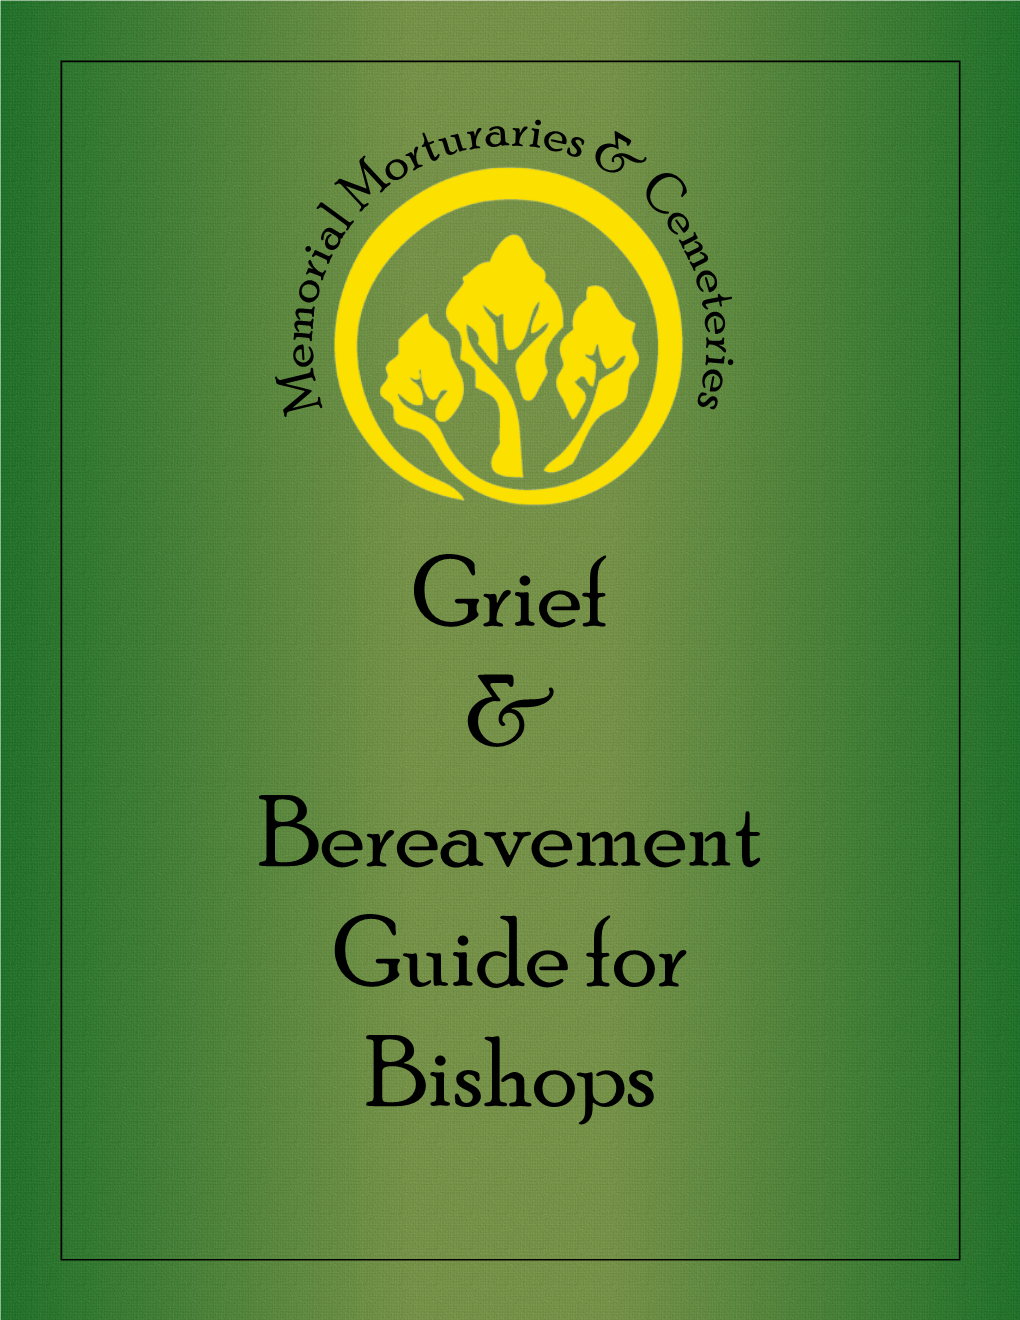 Grief & Bereavement Guide for Bishops